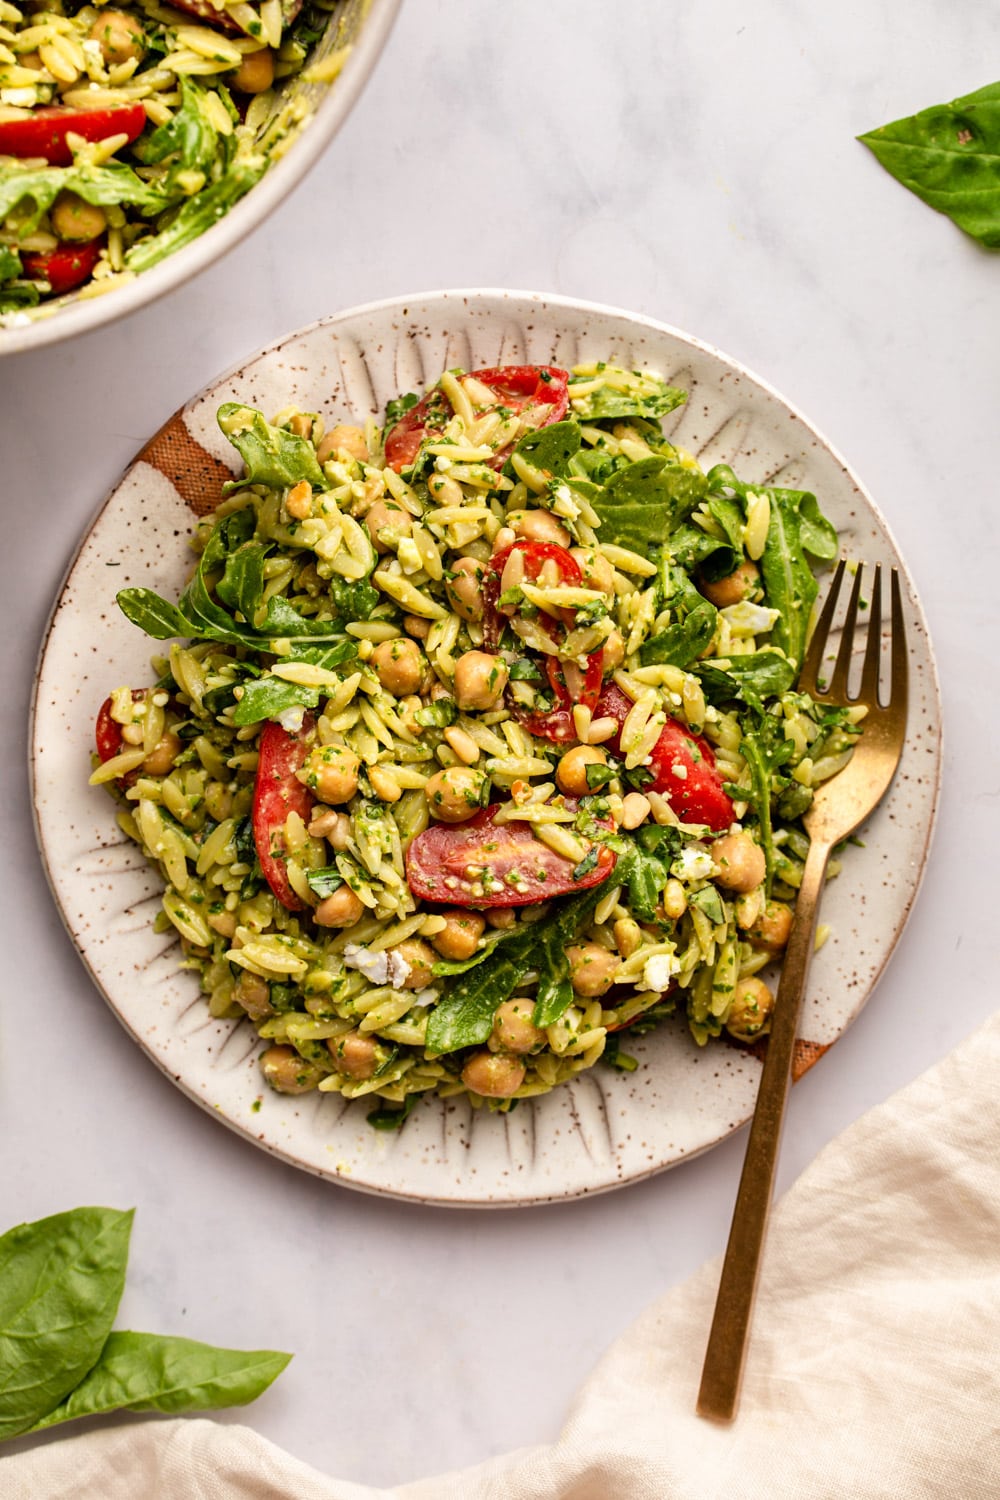 Pesto Orzo Salad served on a plate with a side dish